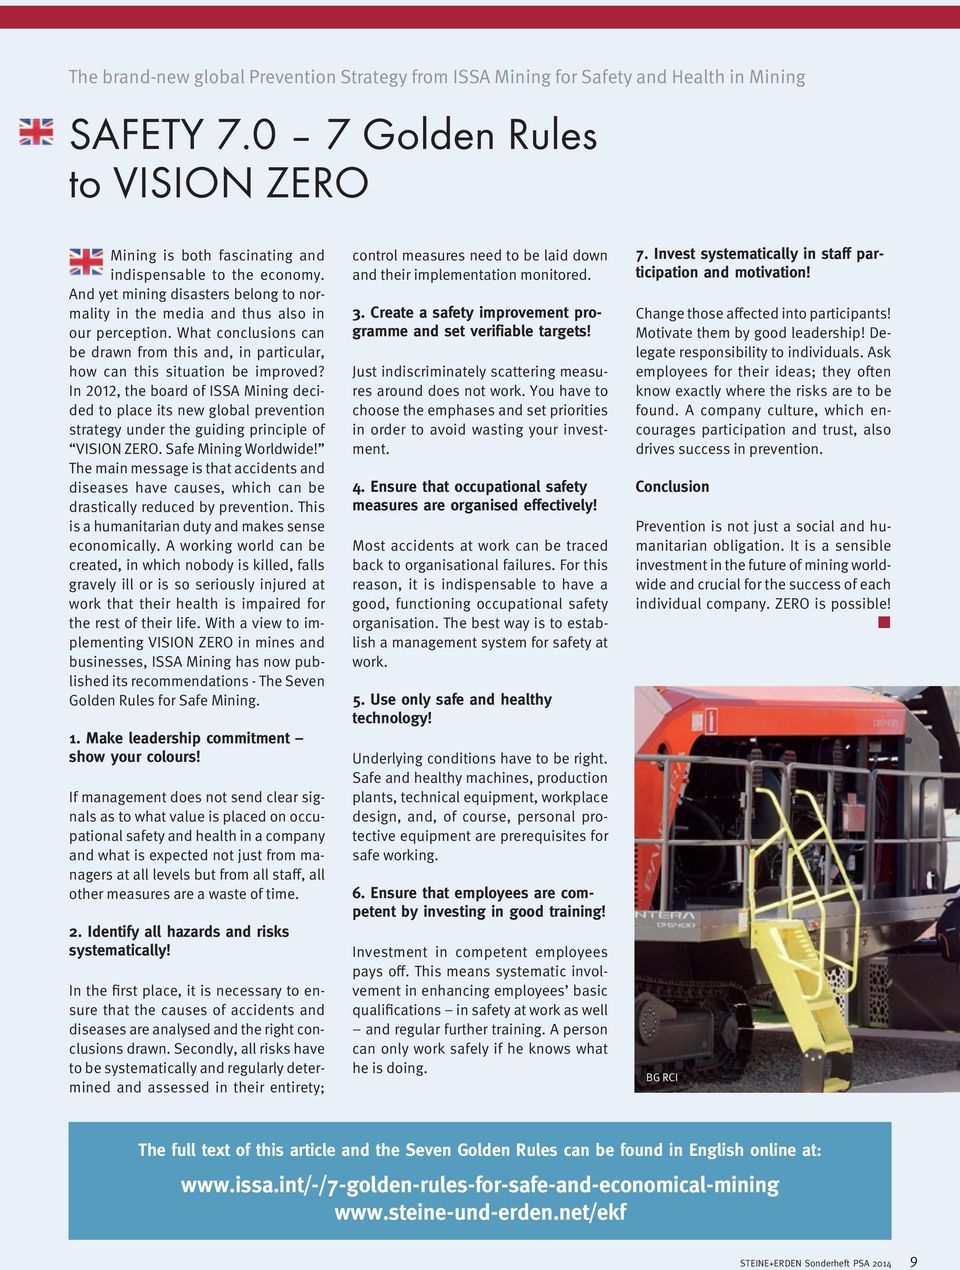 In 2012, the board of ISSA Mining decided to place its new global prevention strategy under the guiding principle of VISION ZERO. Safe Mining Worldwide!